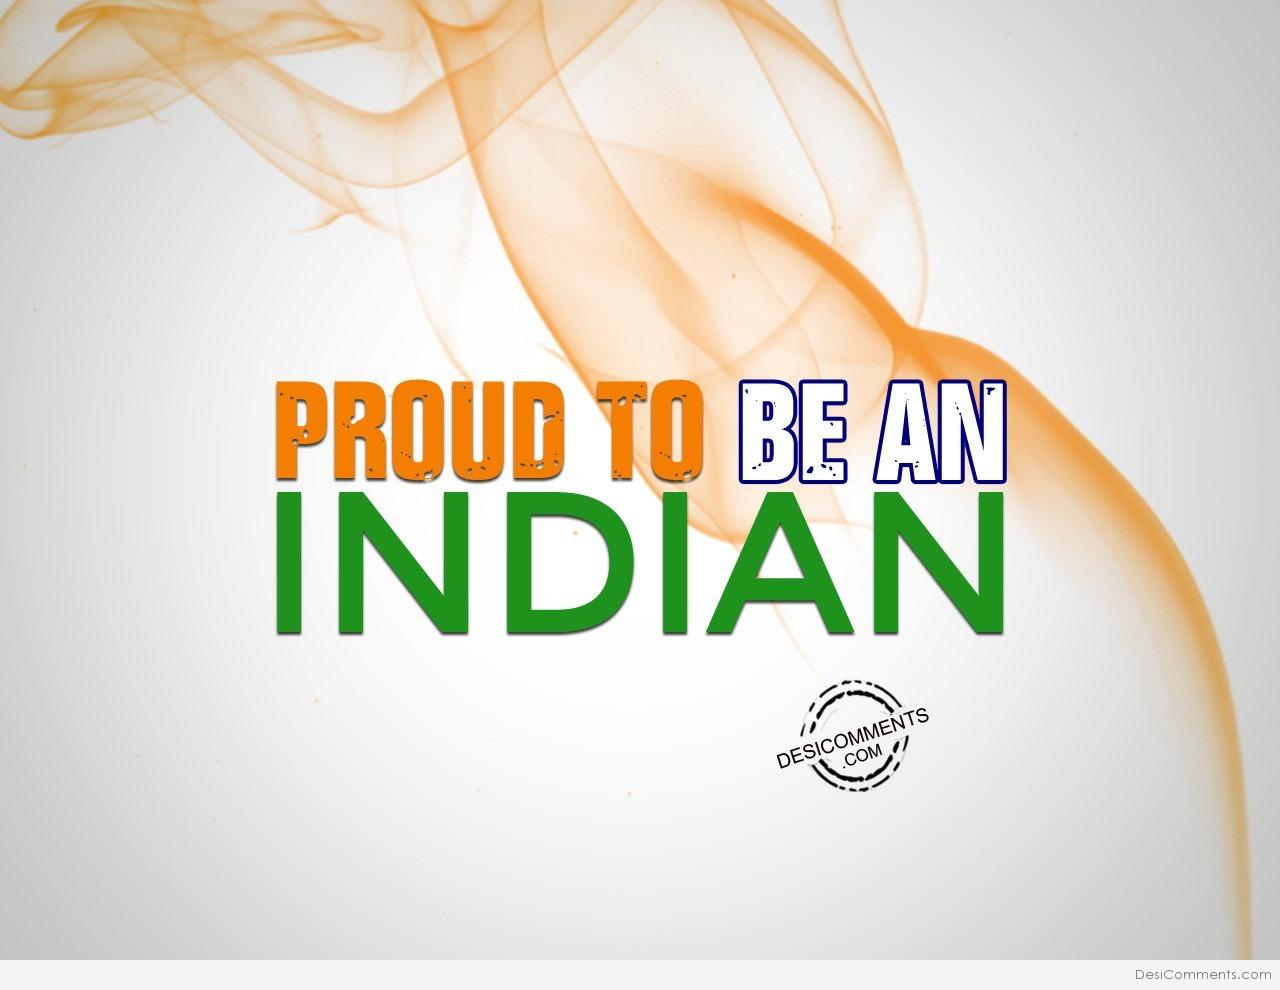 Proud To Be An Indian - DesiComments.com